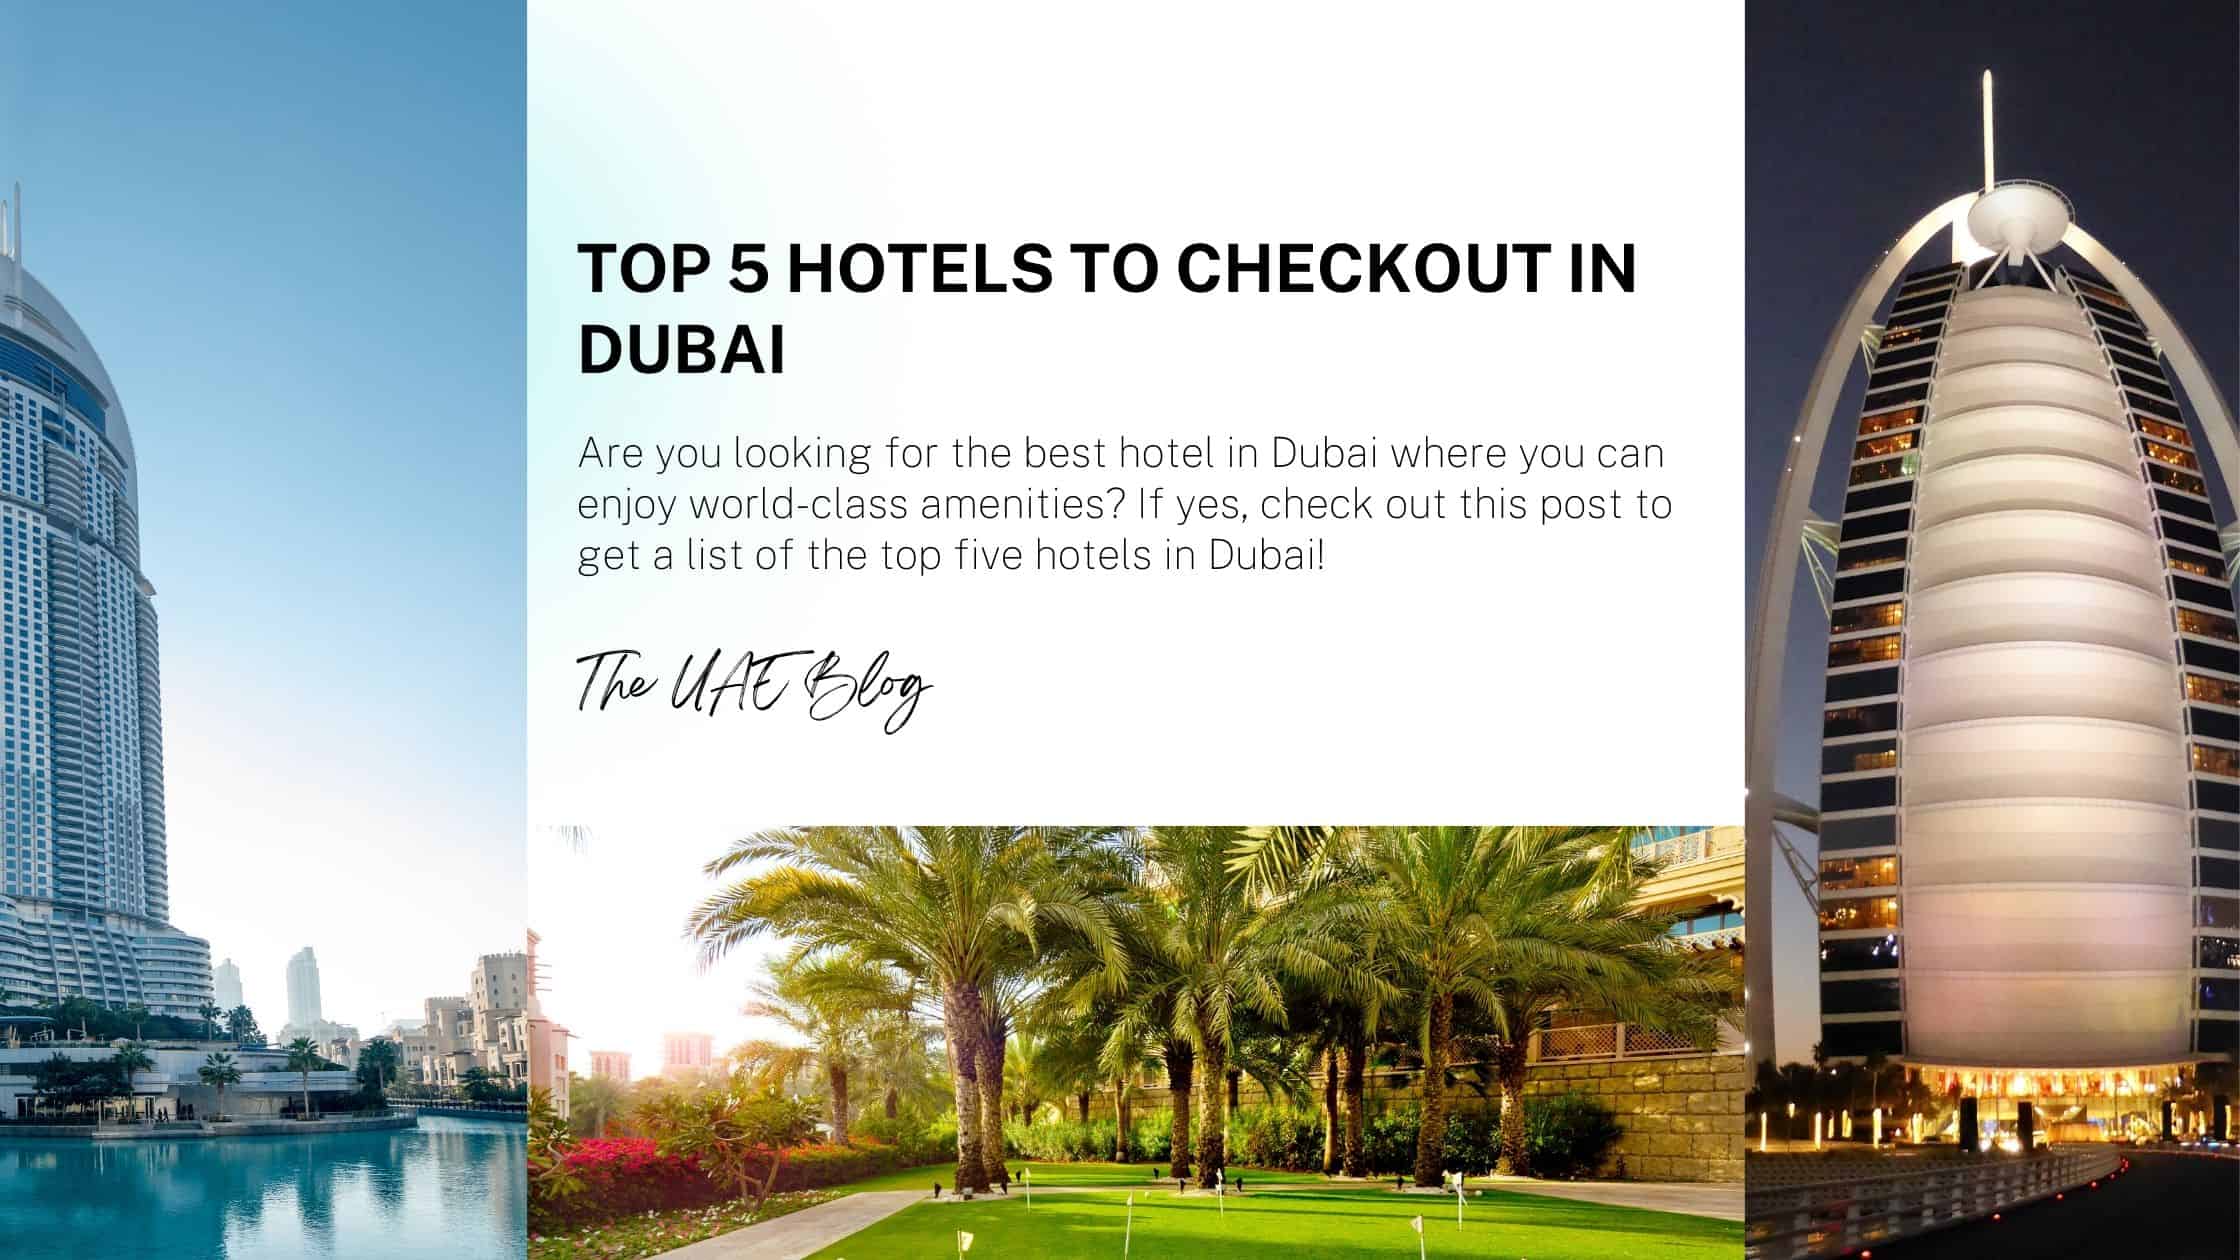 Top 5 Hotels to Checkout in Dubai